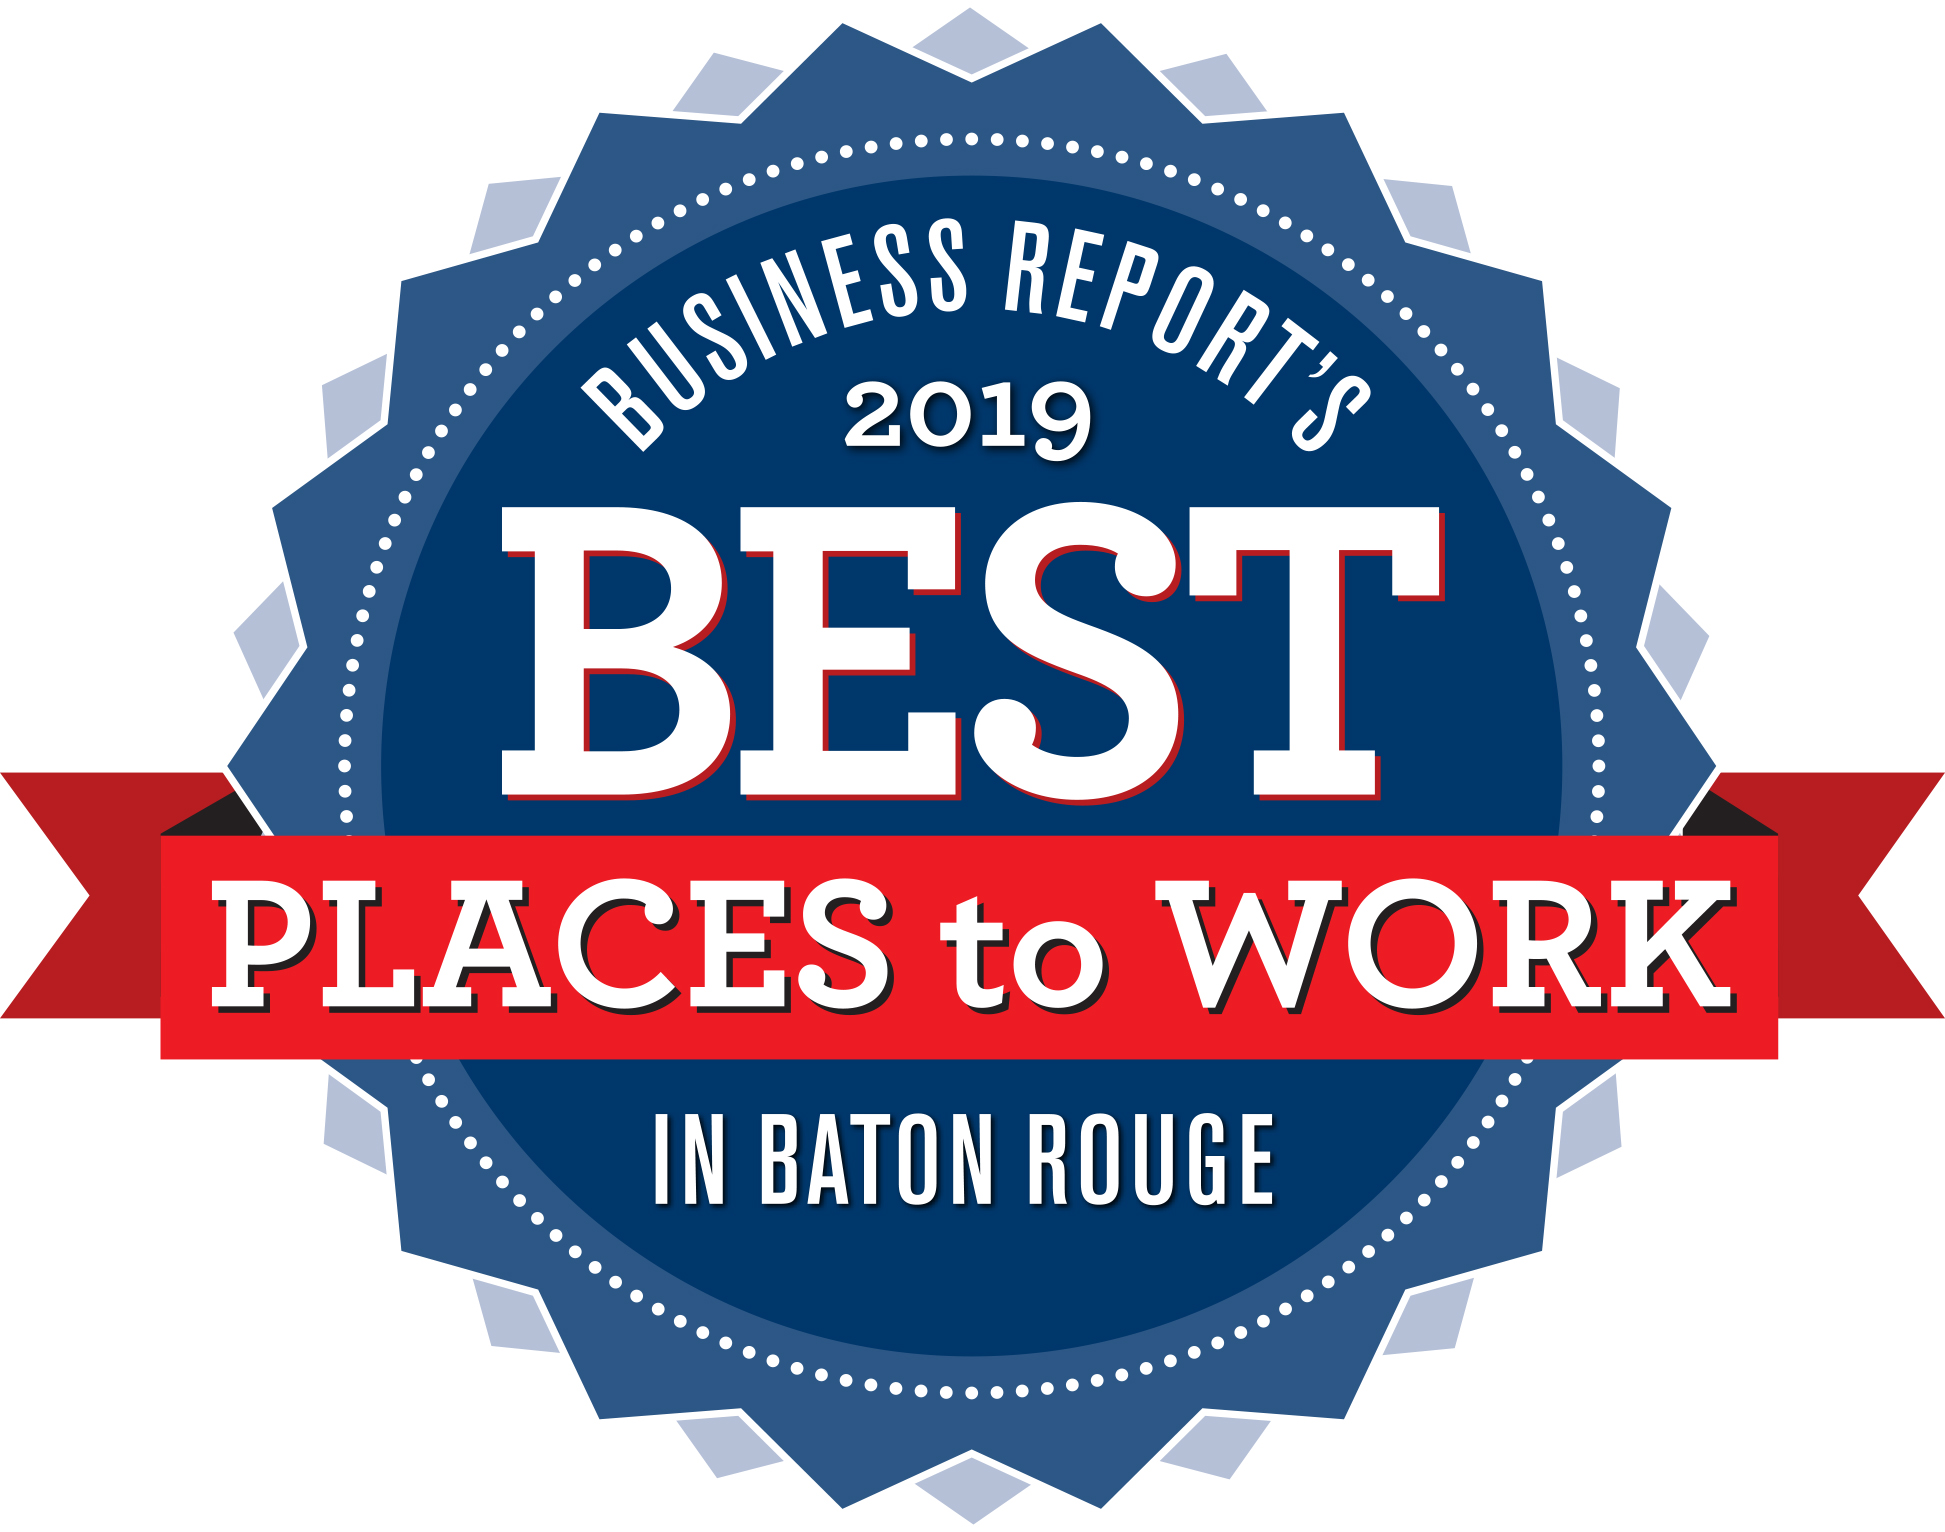 Register now for the 2019 Best Places to Work Baton Rouge Business Report